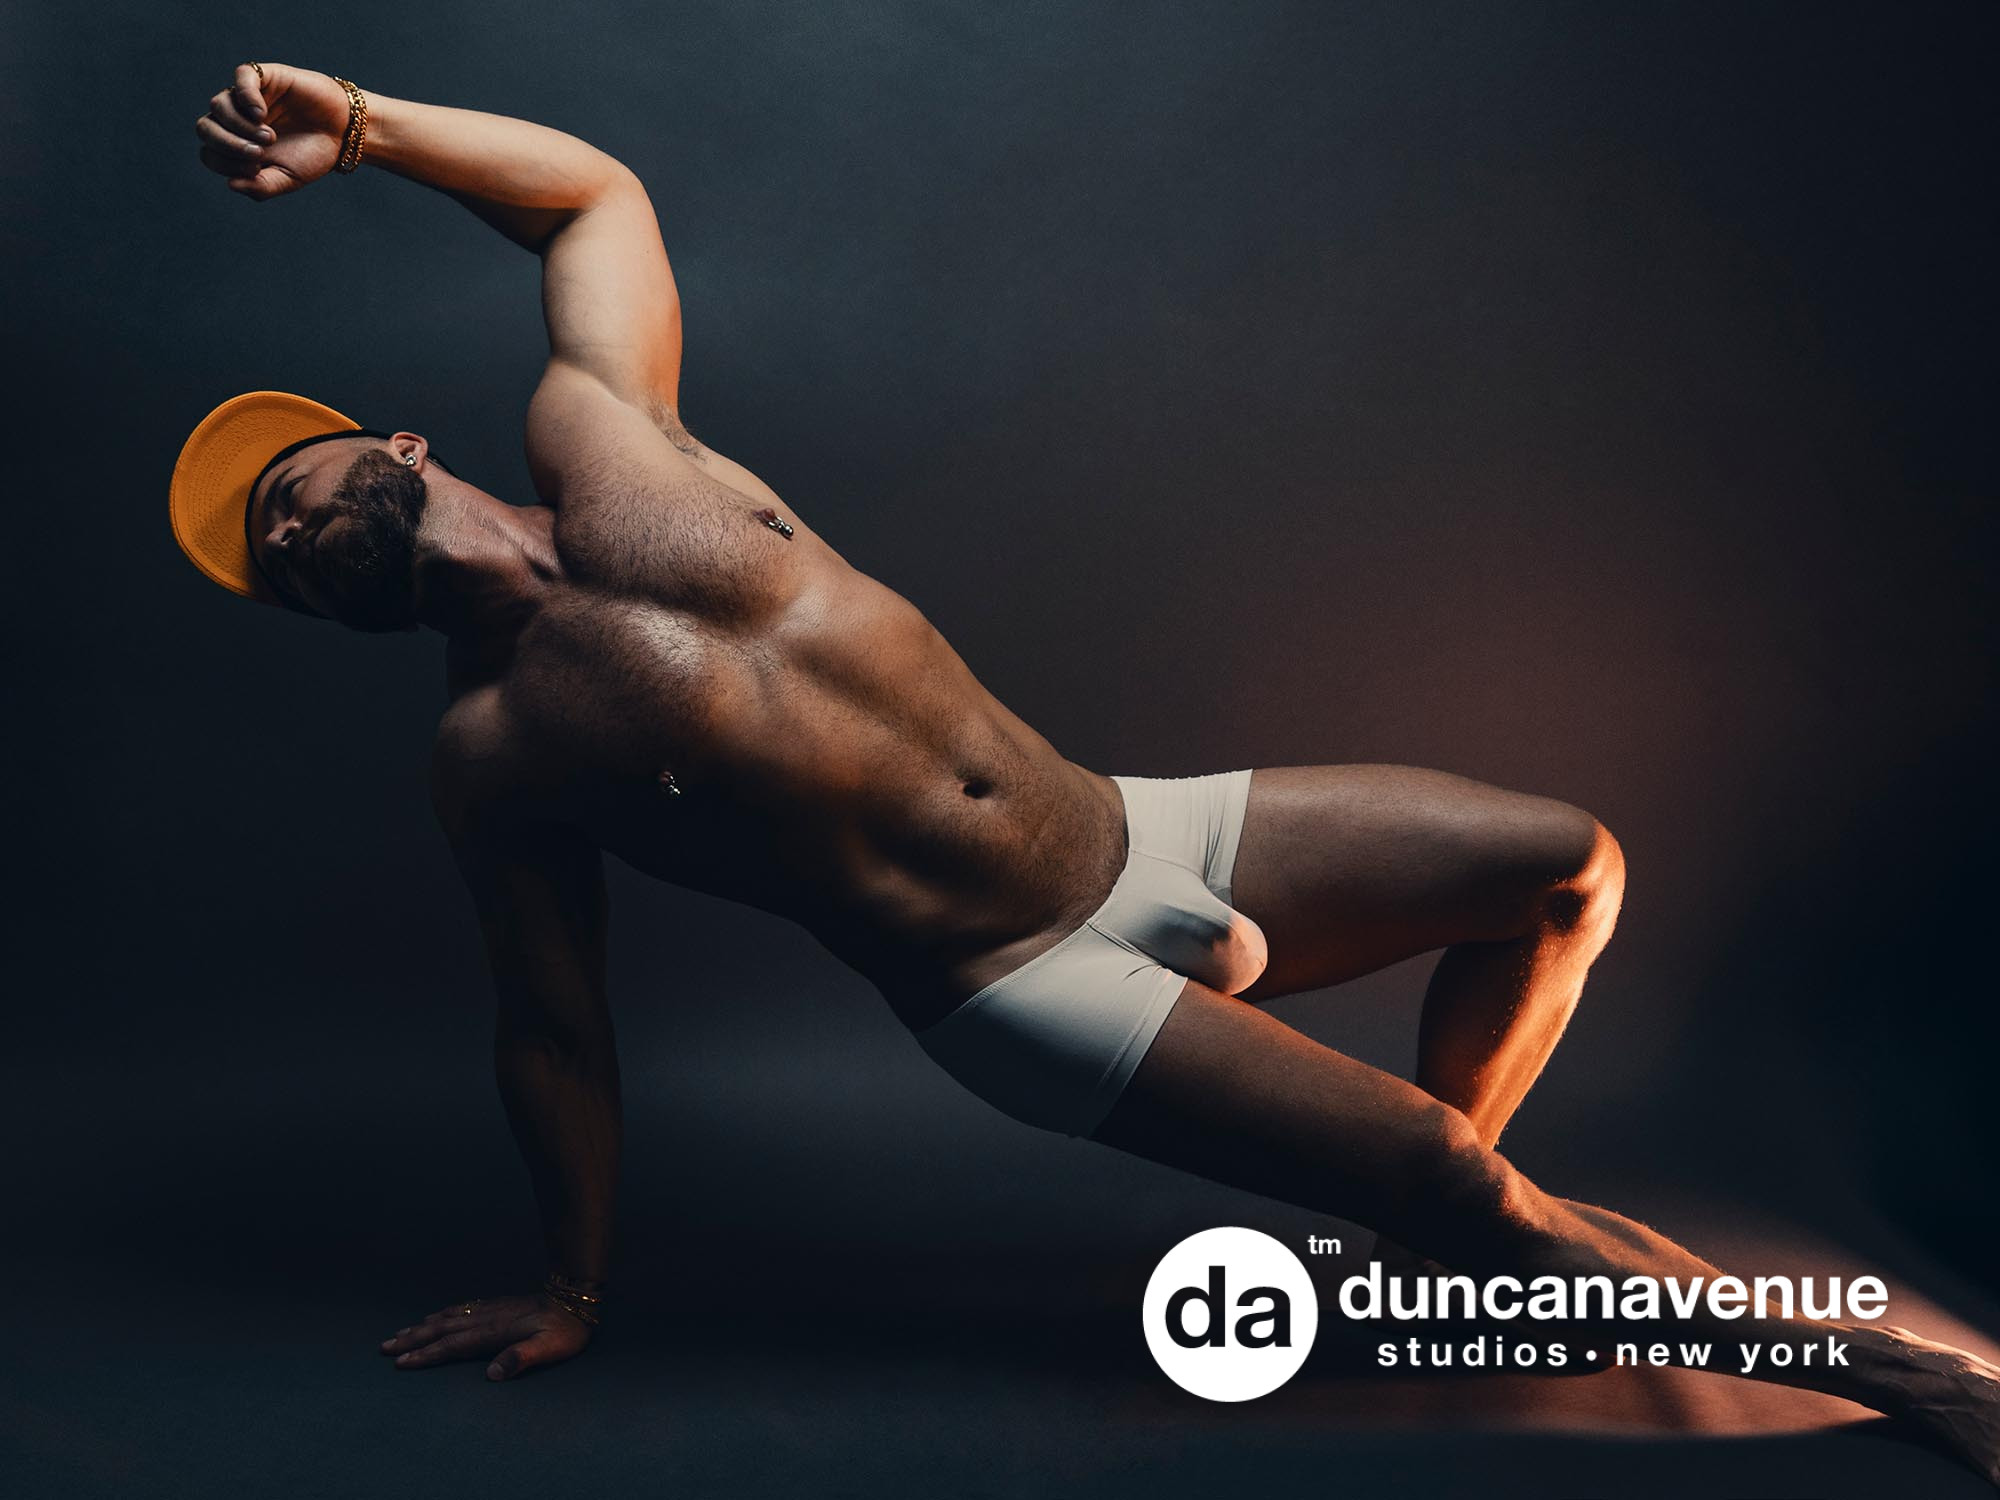 Maxwell Alexander's Gay Male Boudoir Photography: A Bold Reclamation of Identity and Resistance Against Homophobia – NYC Queer Boudoir Experience at Duncan Avenue Studios